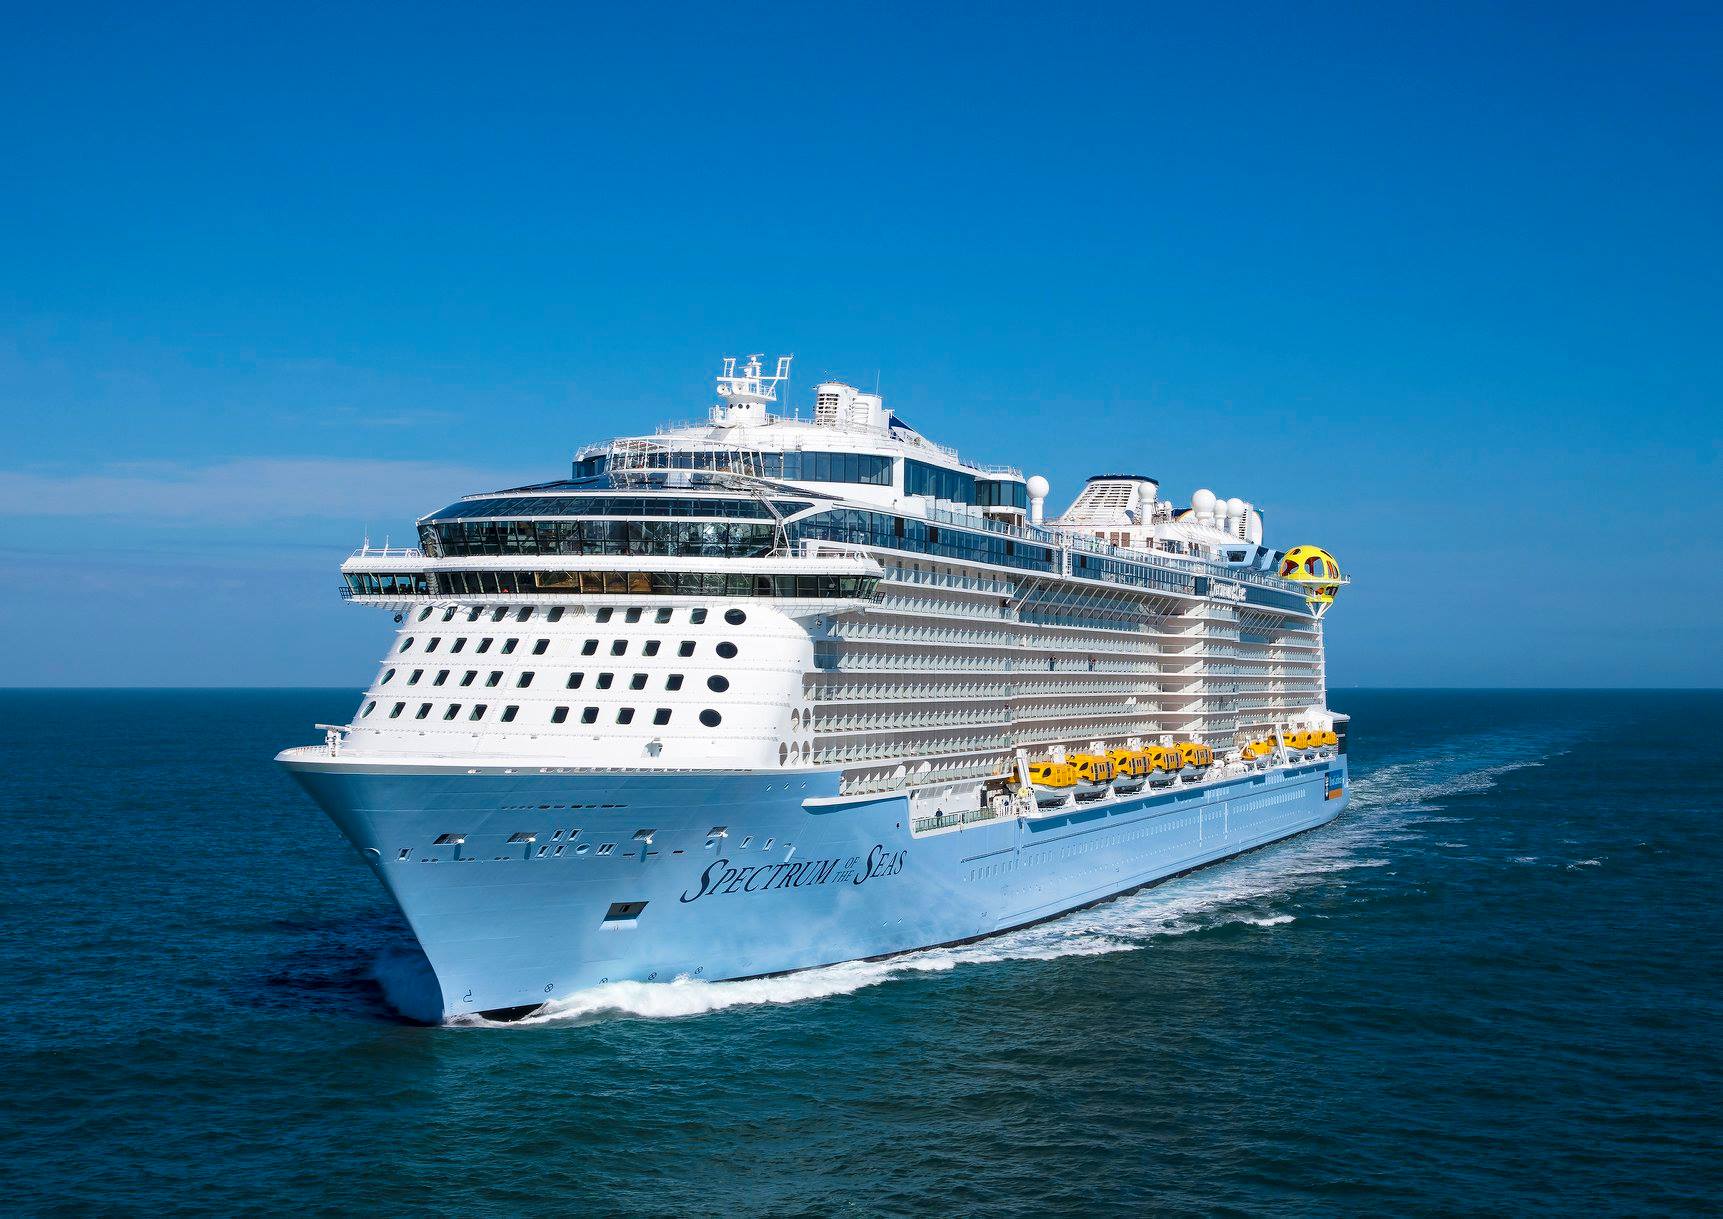 Spectrum of the Seas joins Royal Caribbean&#39;s fleet following delivery ceremony | Royal Caribbean Blog